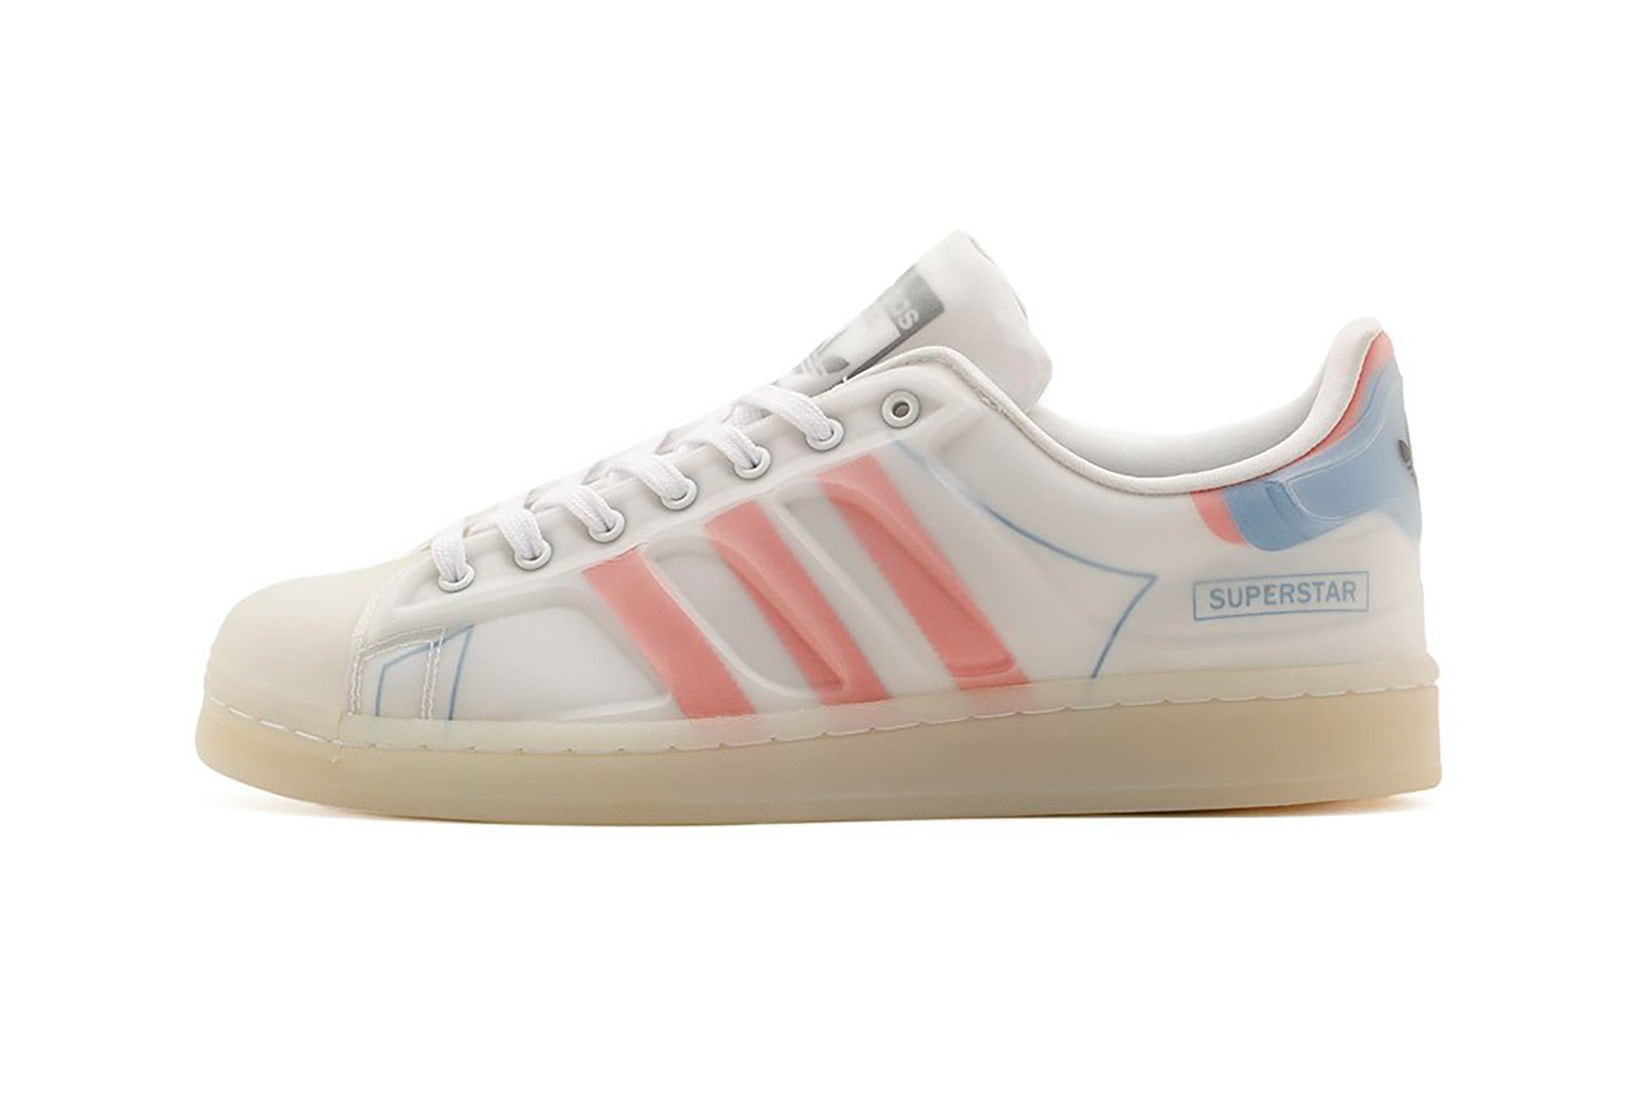 adidas superstar futurshell sneakers white coral pink blue colorway footwear shoes kicks sneakerhead lateral